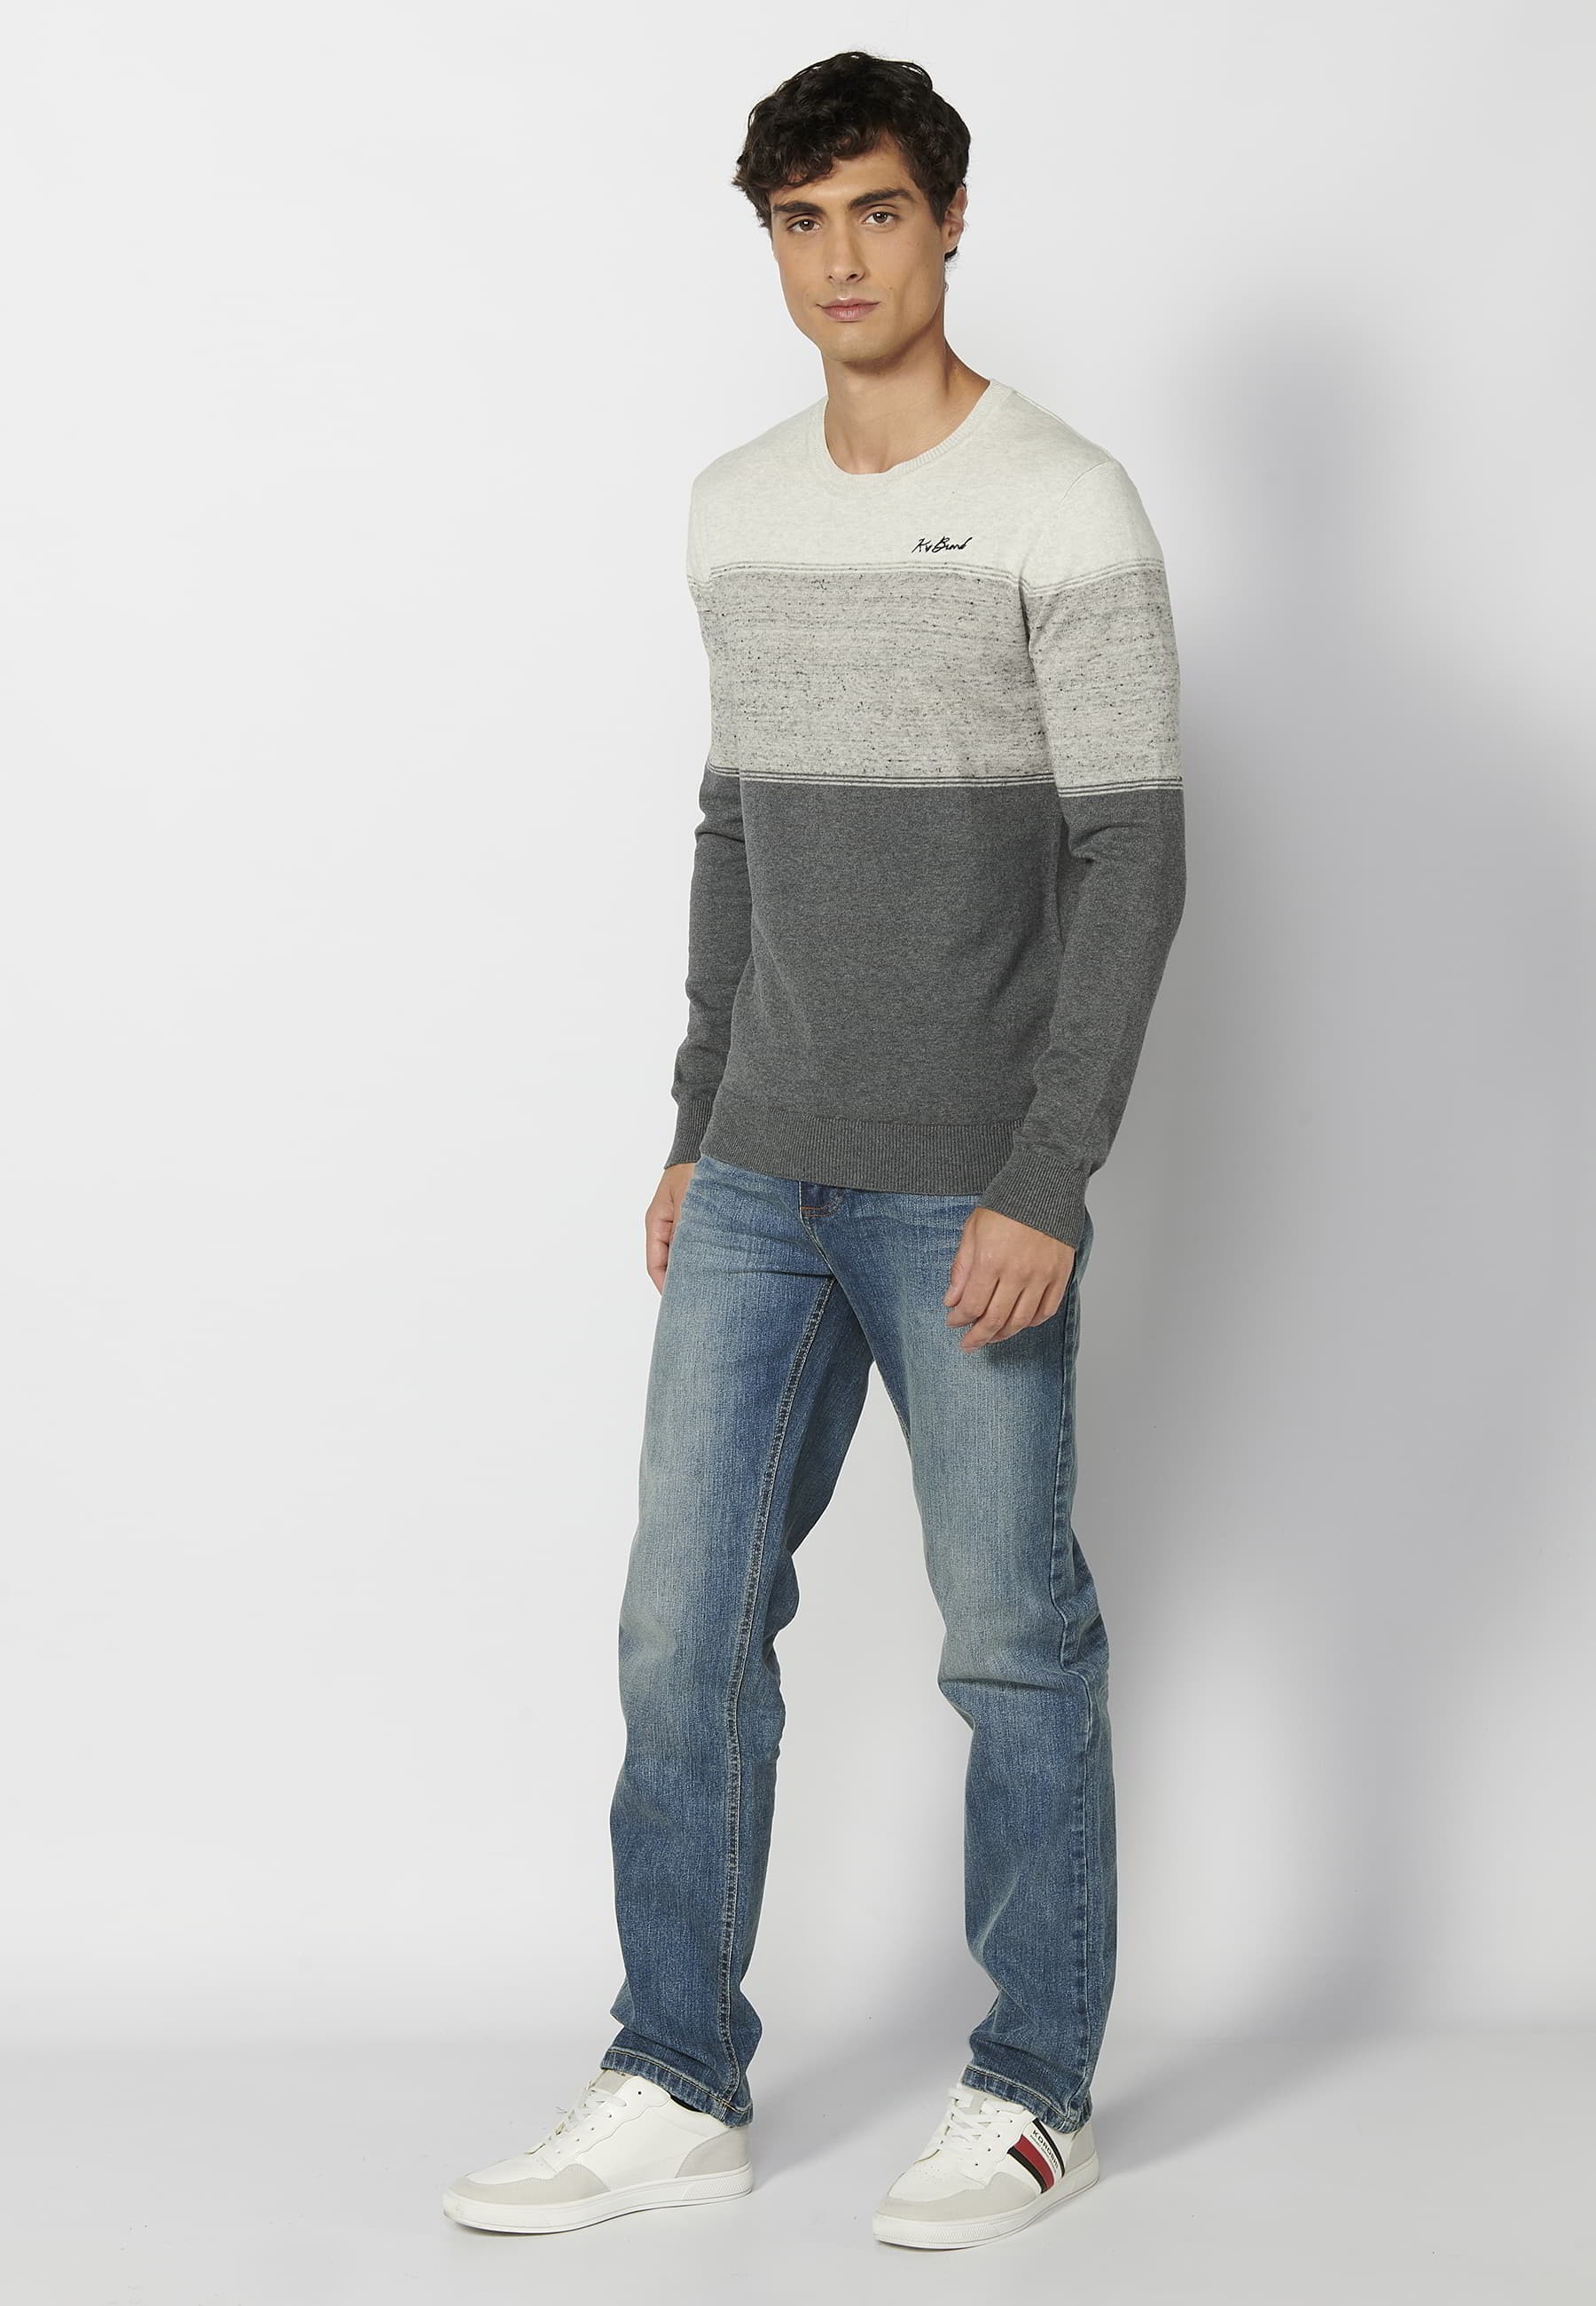 Men's Gray Round Neck Long Sleeve Cotton Knit Sweater 2